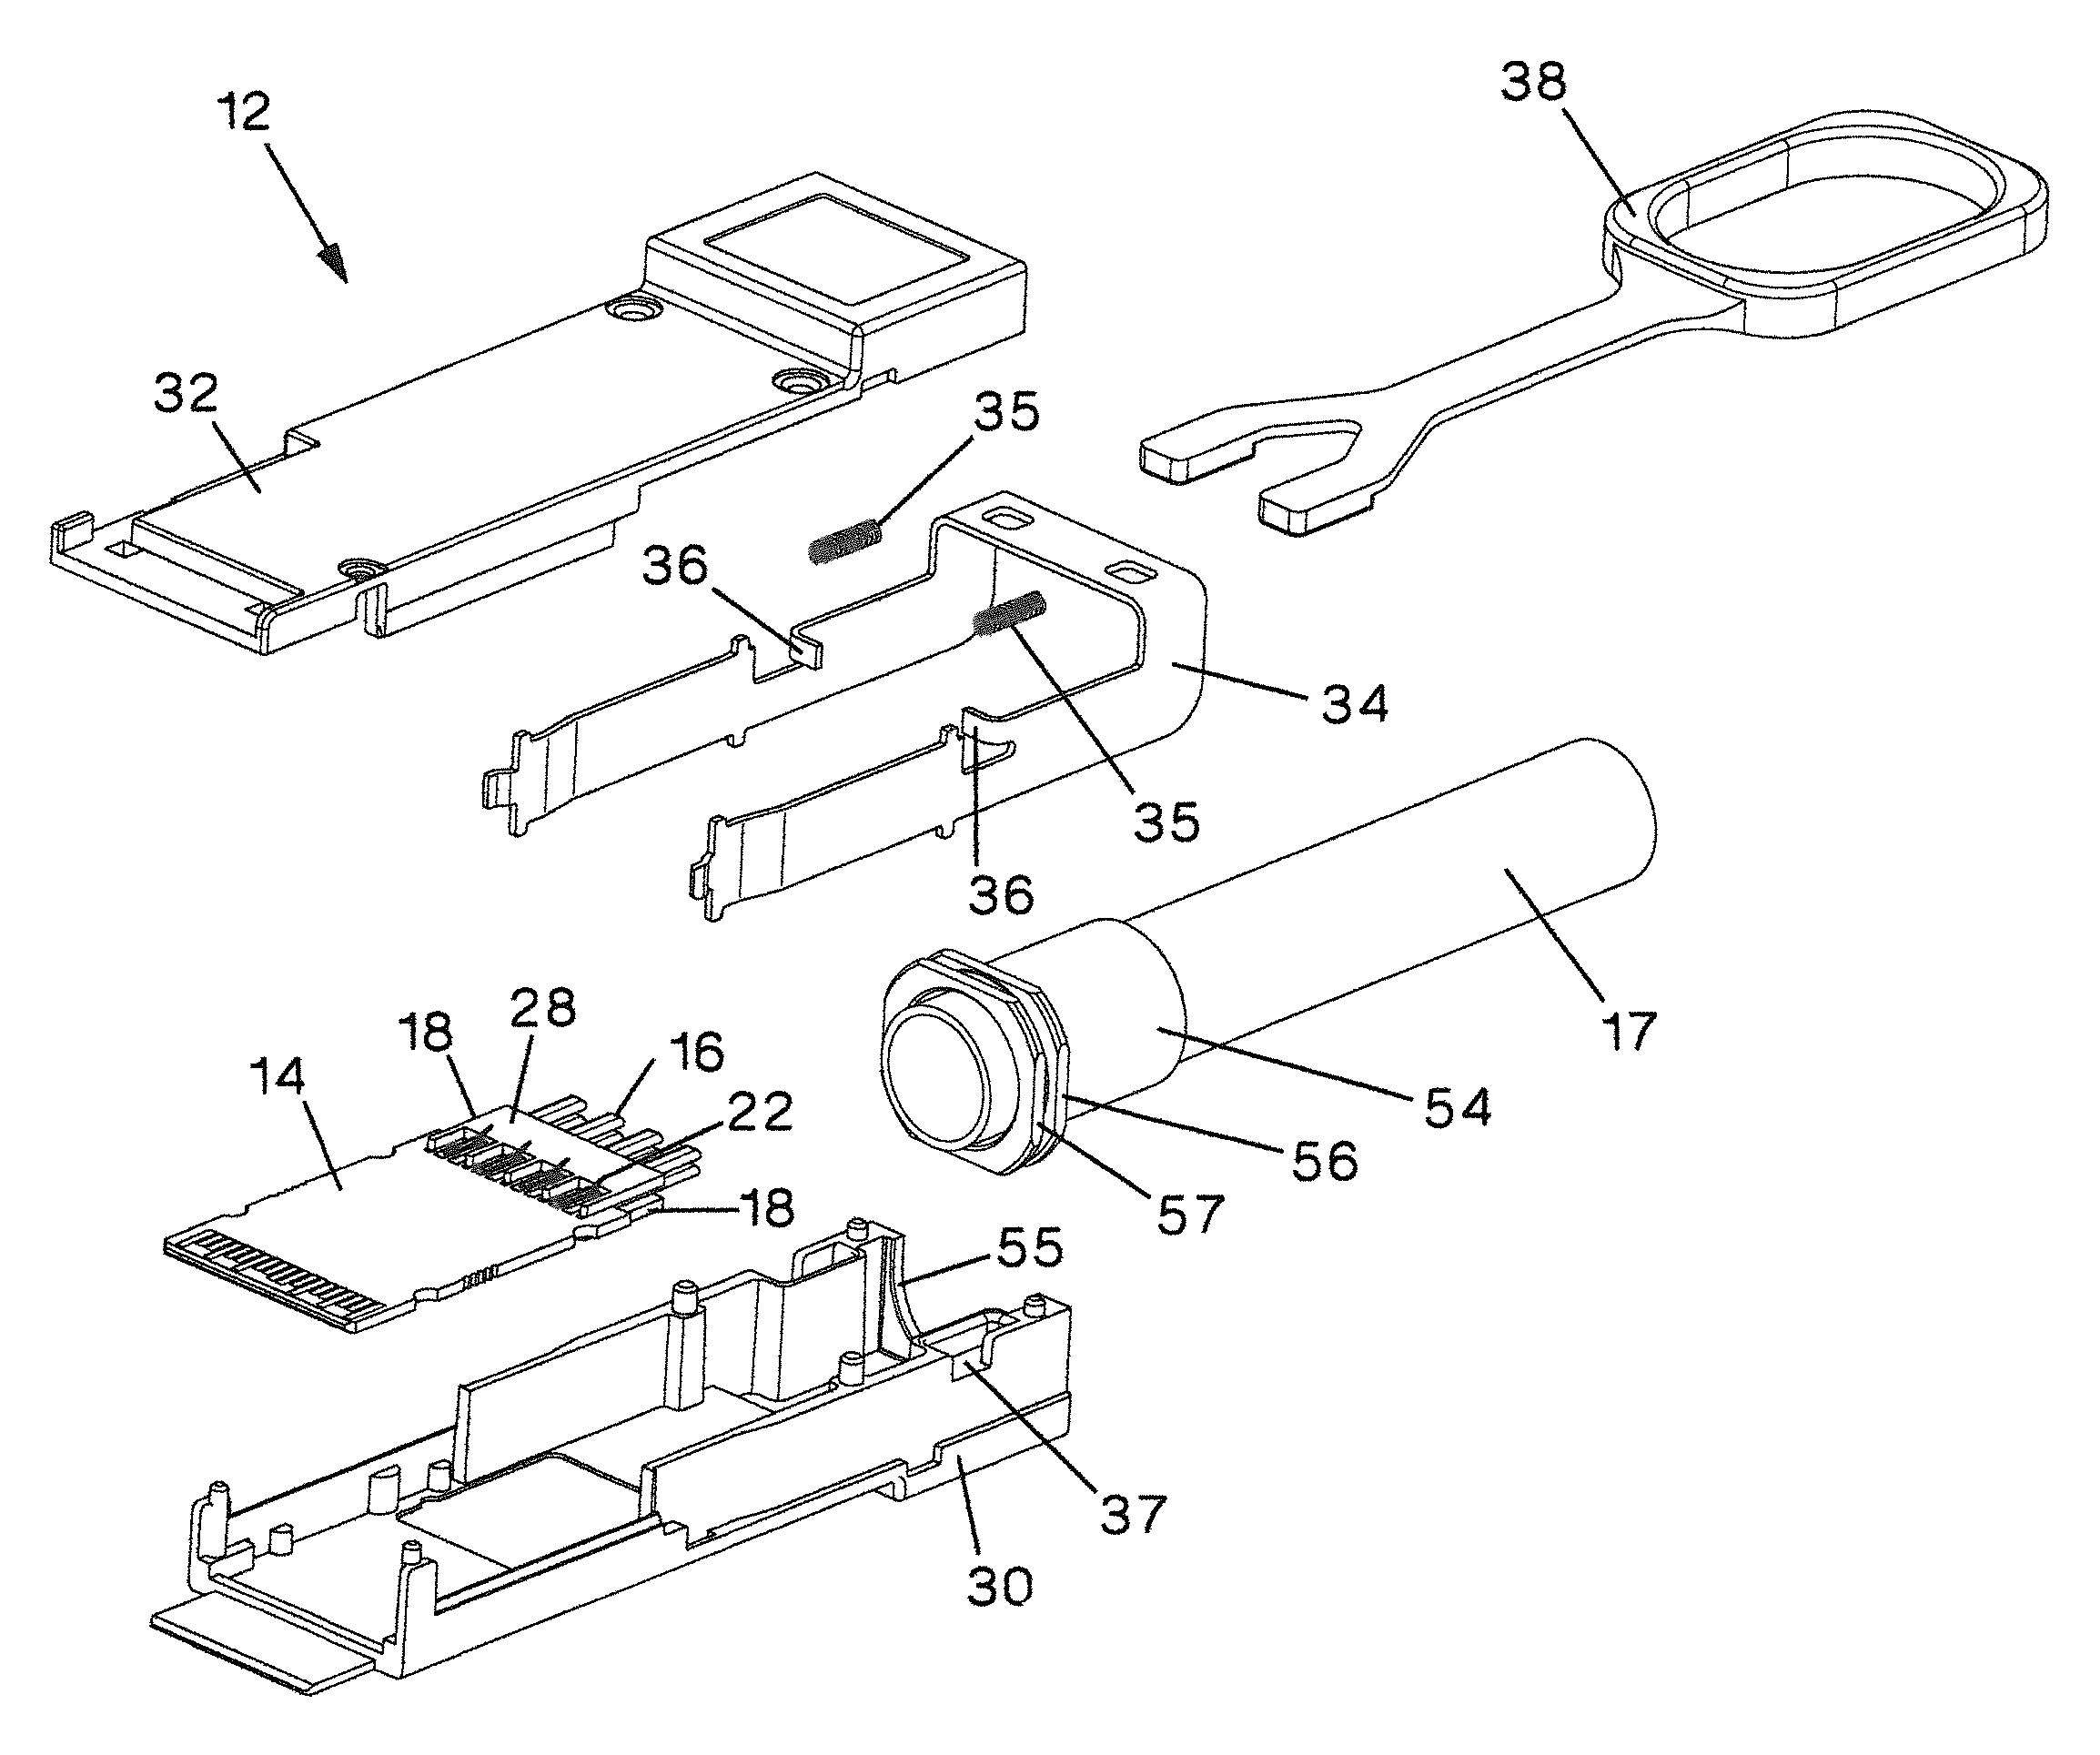 High data rate electrical connector and cable assembly